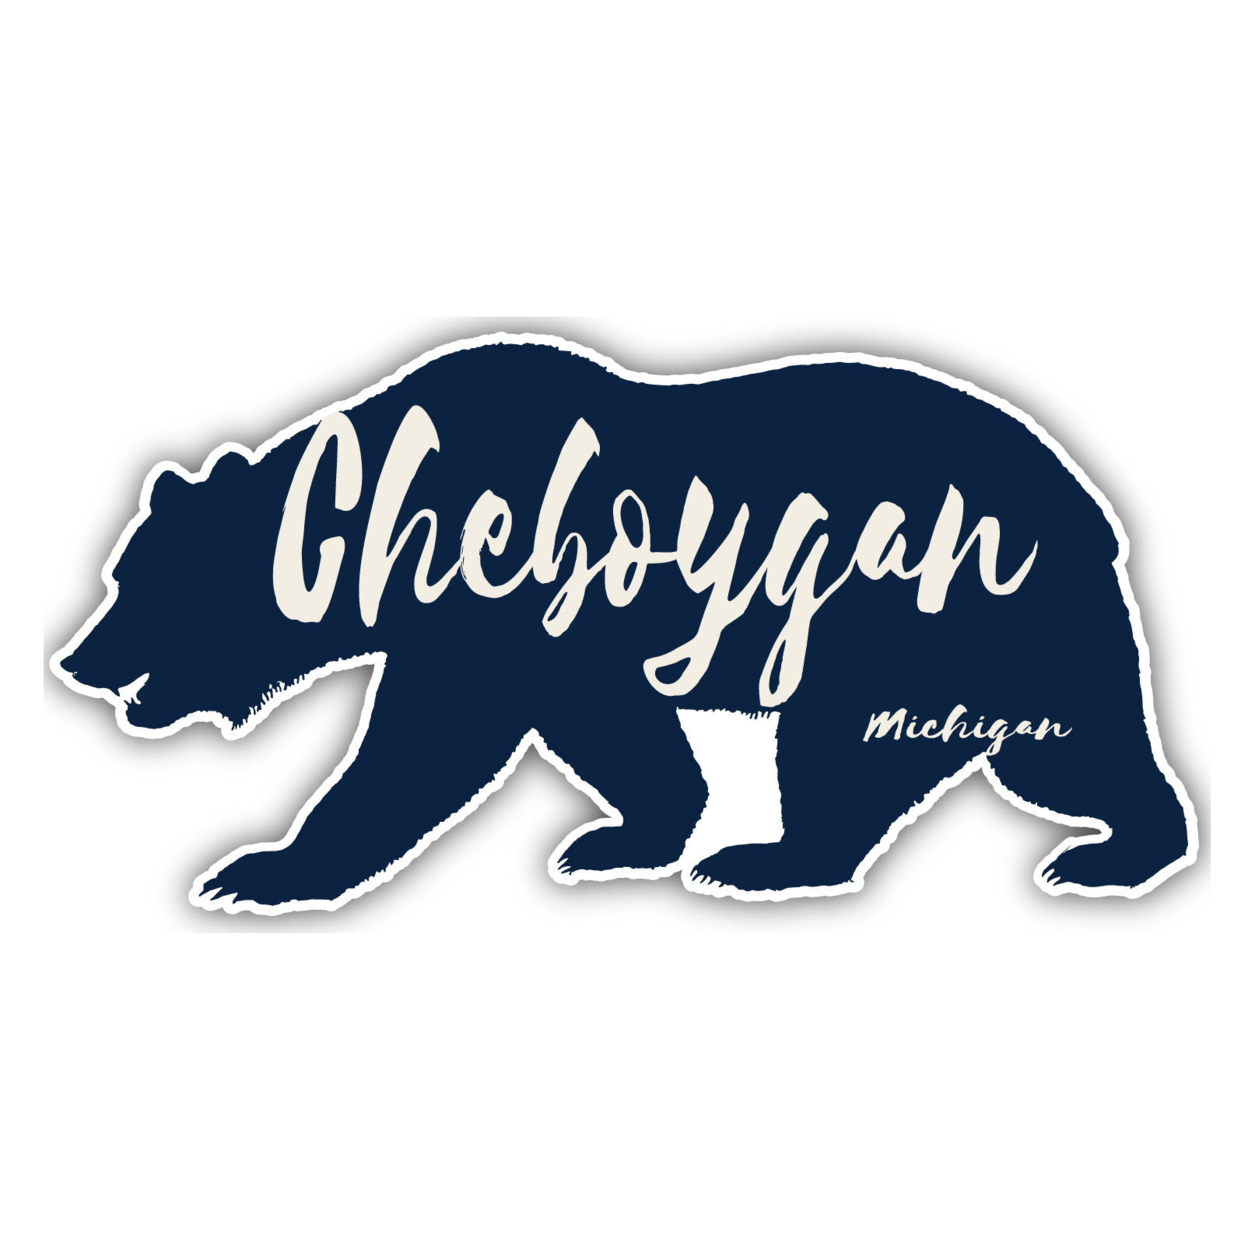 Cheboygan Michigan Souvenir Decorative Stickers (Choose Theme And Size) - 4-Pack, 10-Inch, Great Outdoors